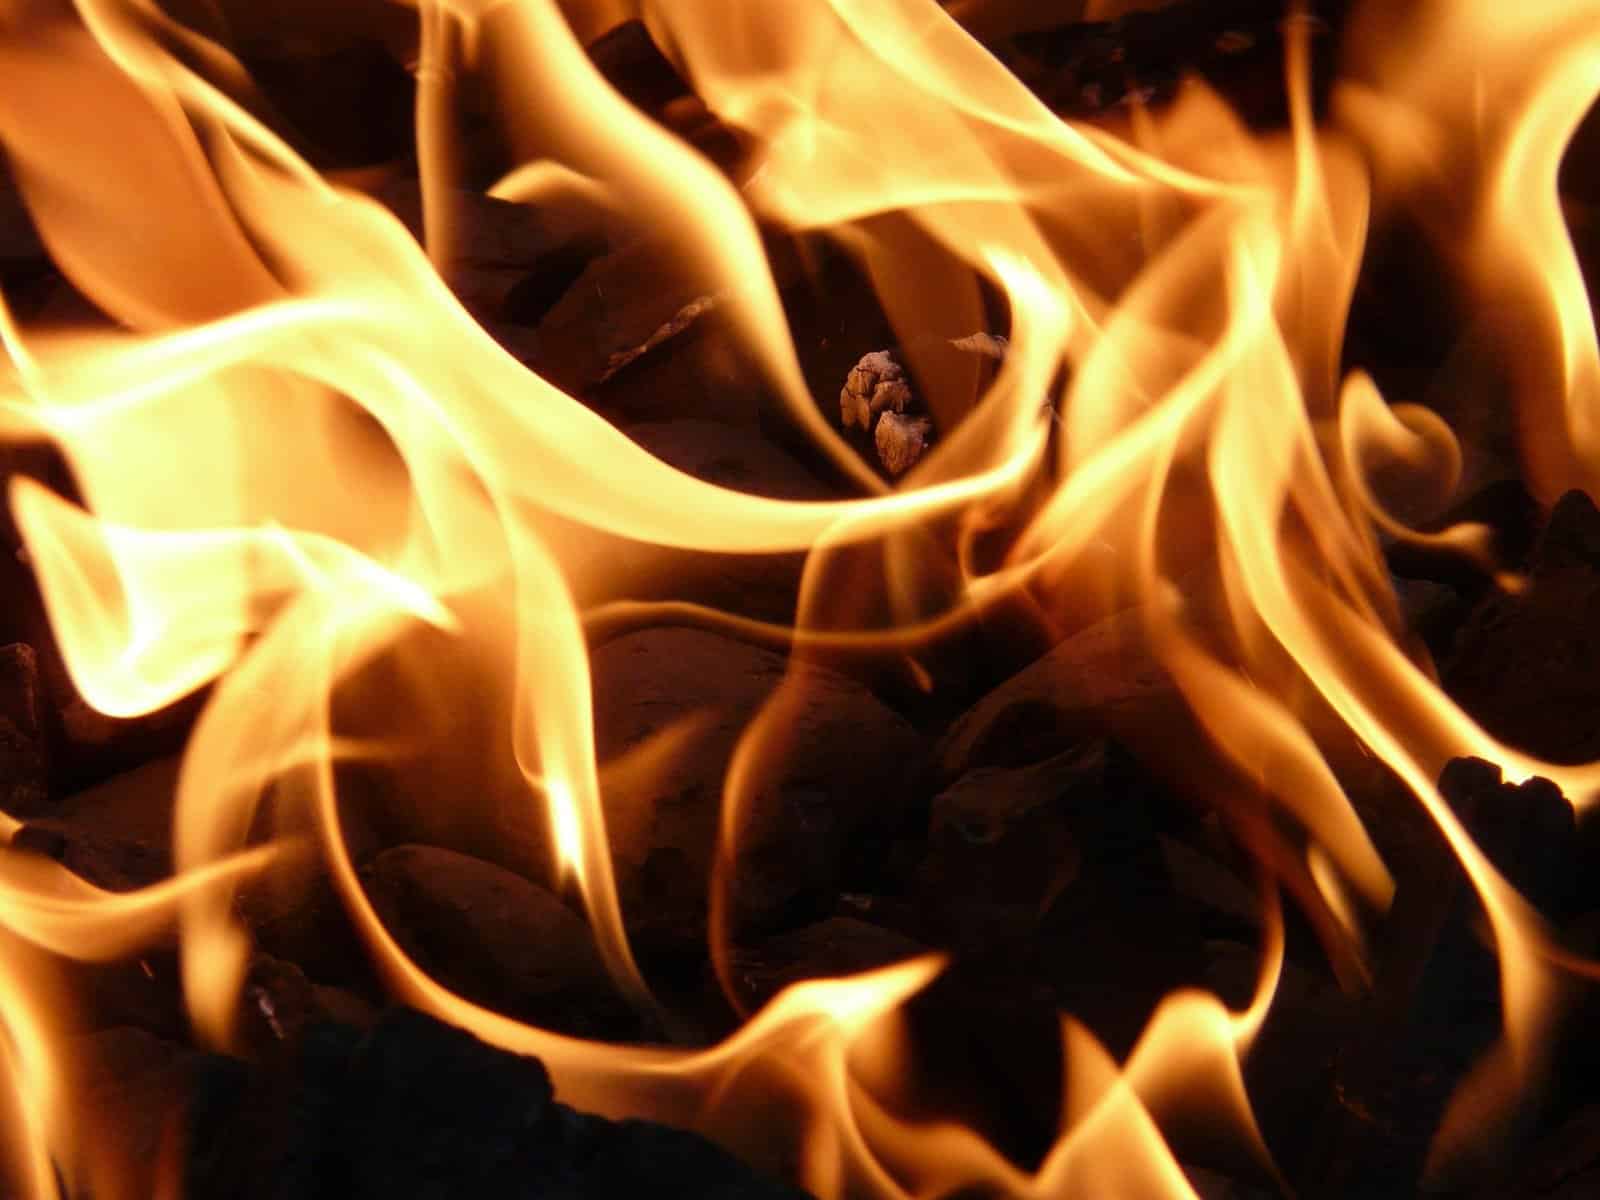 A close up image of a wood fire with orange and yellow flames.